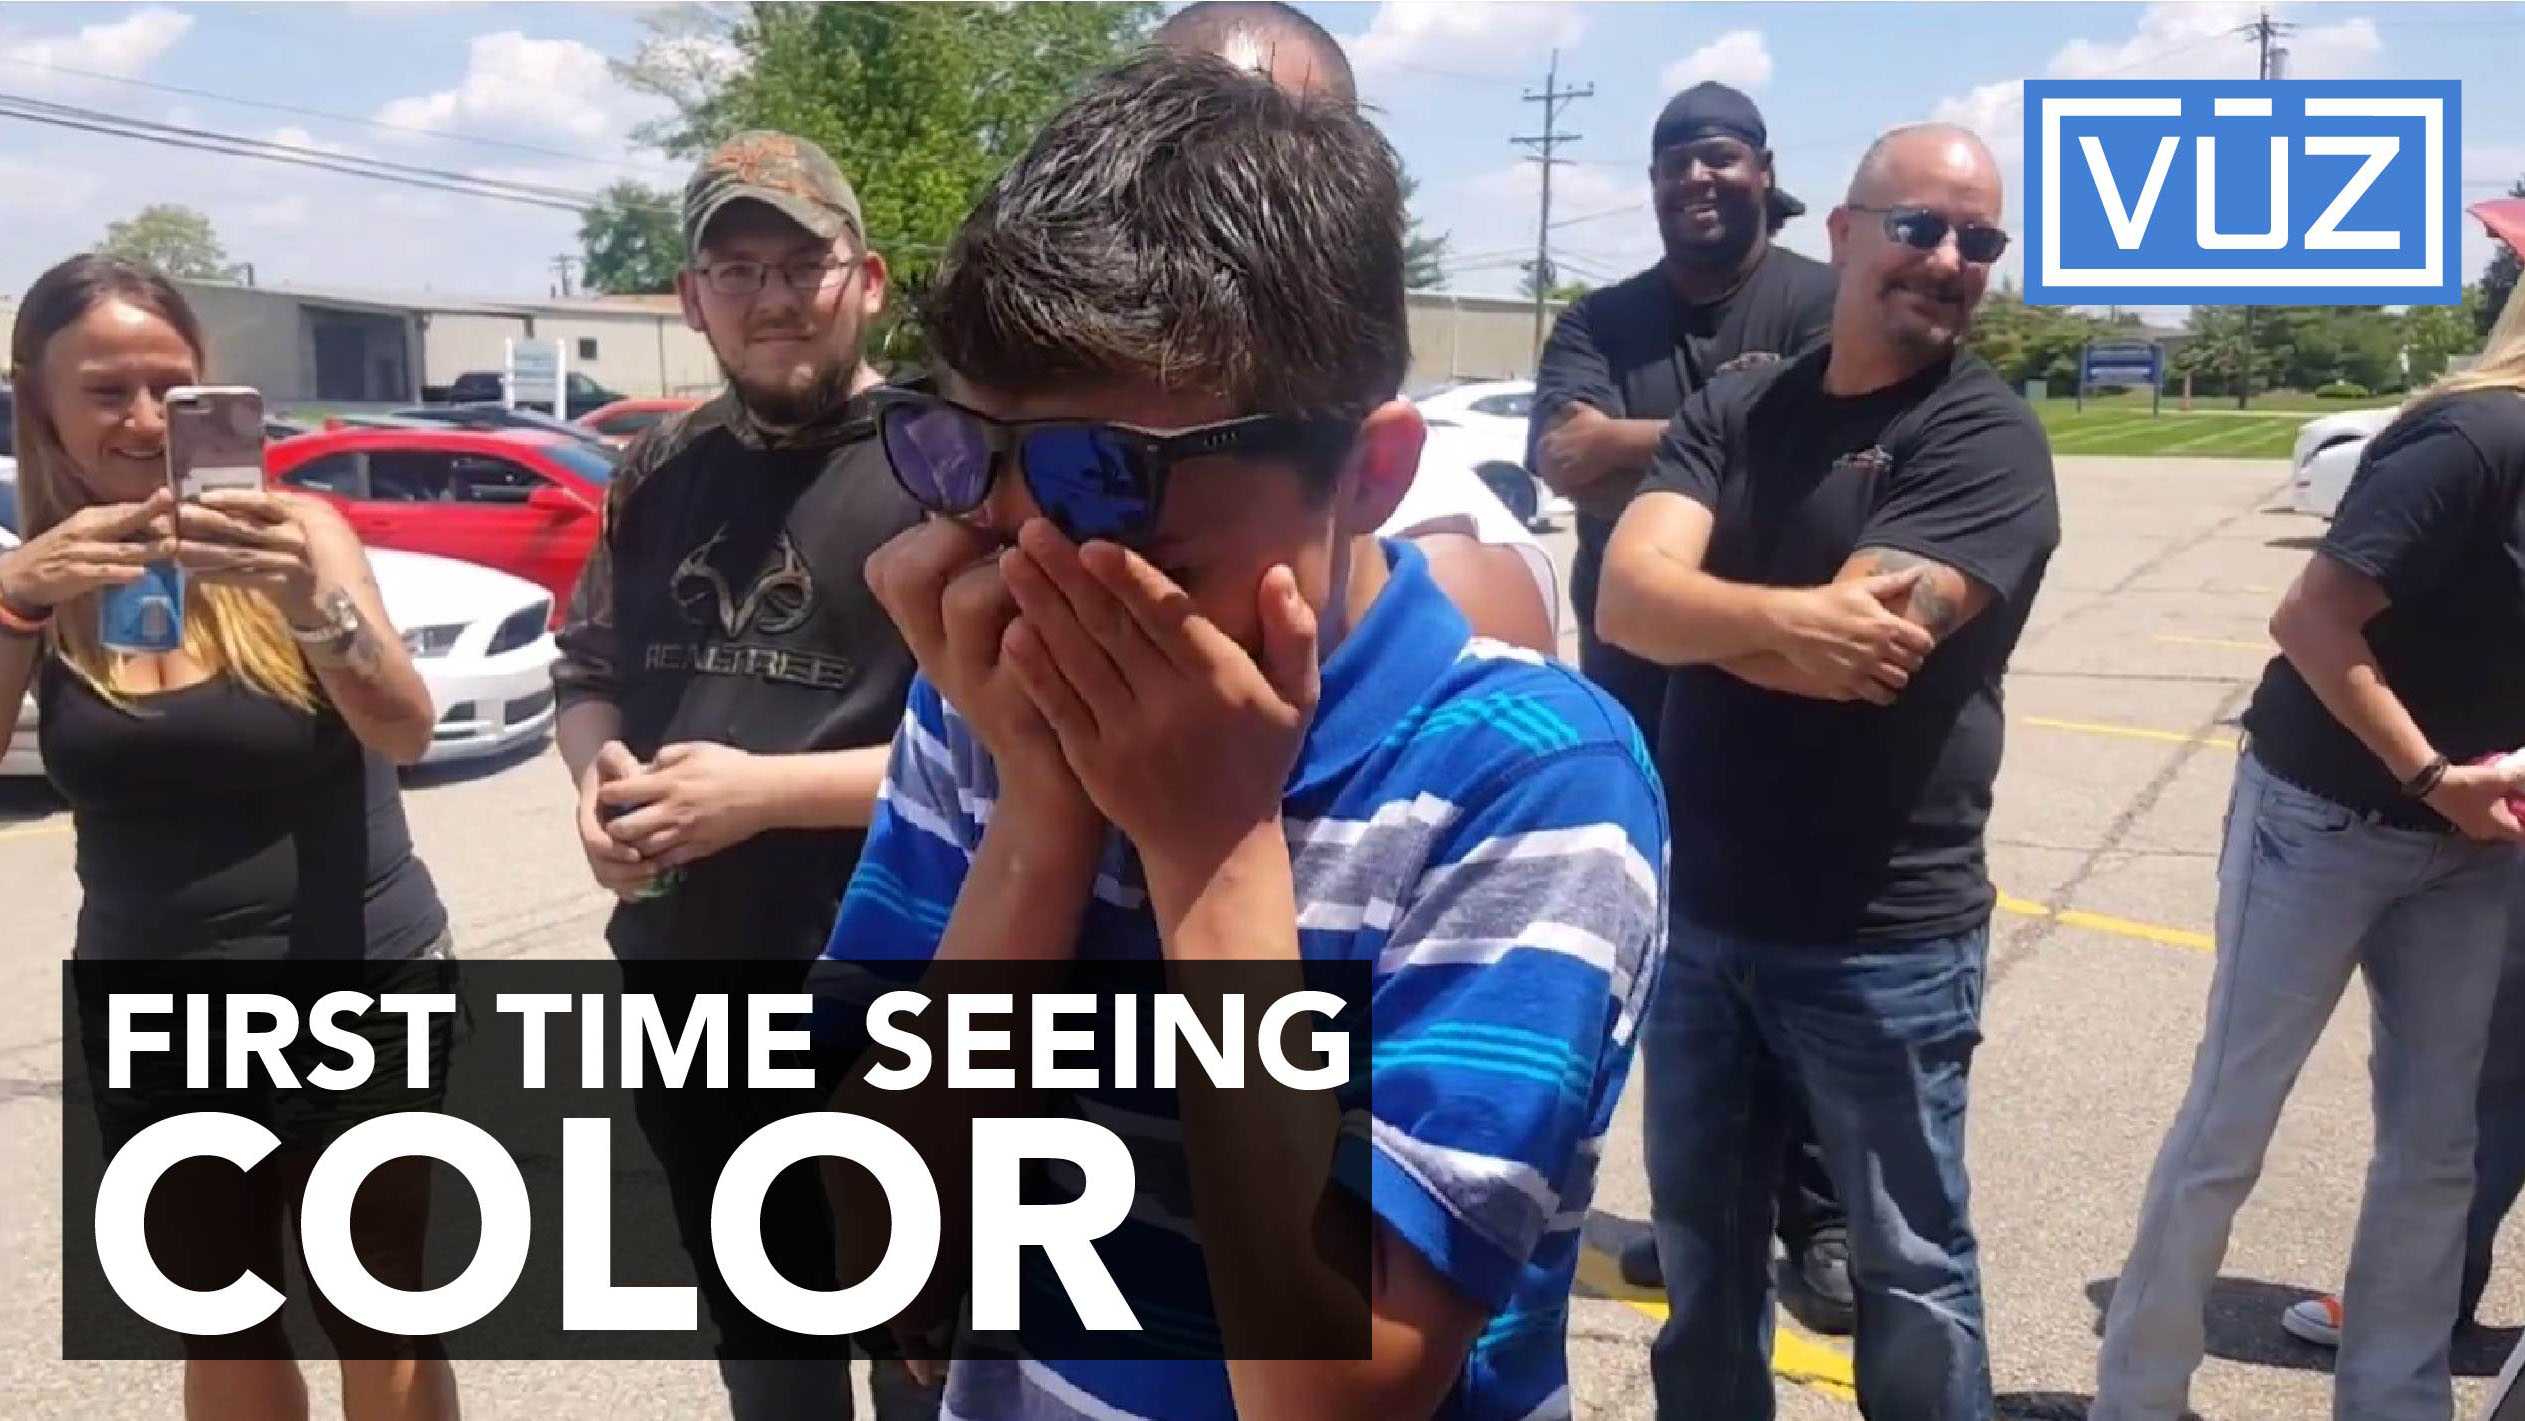 Emotional Moment: Boy's world filled with color for the first time